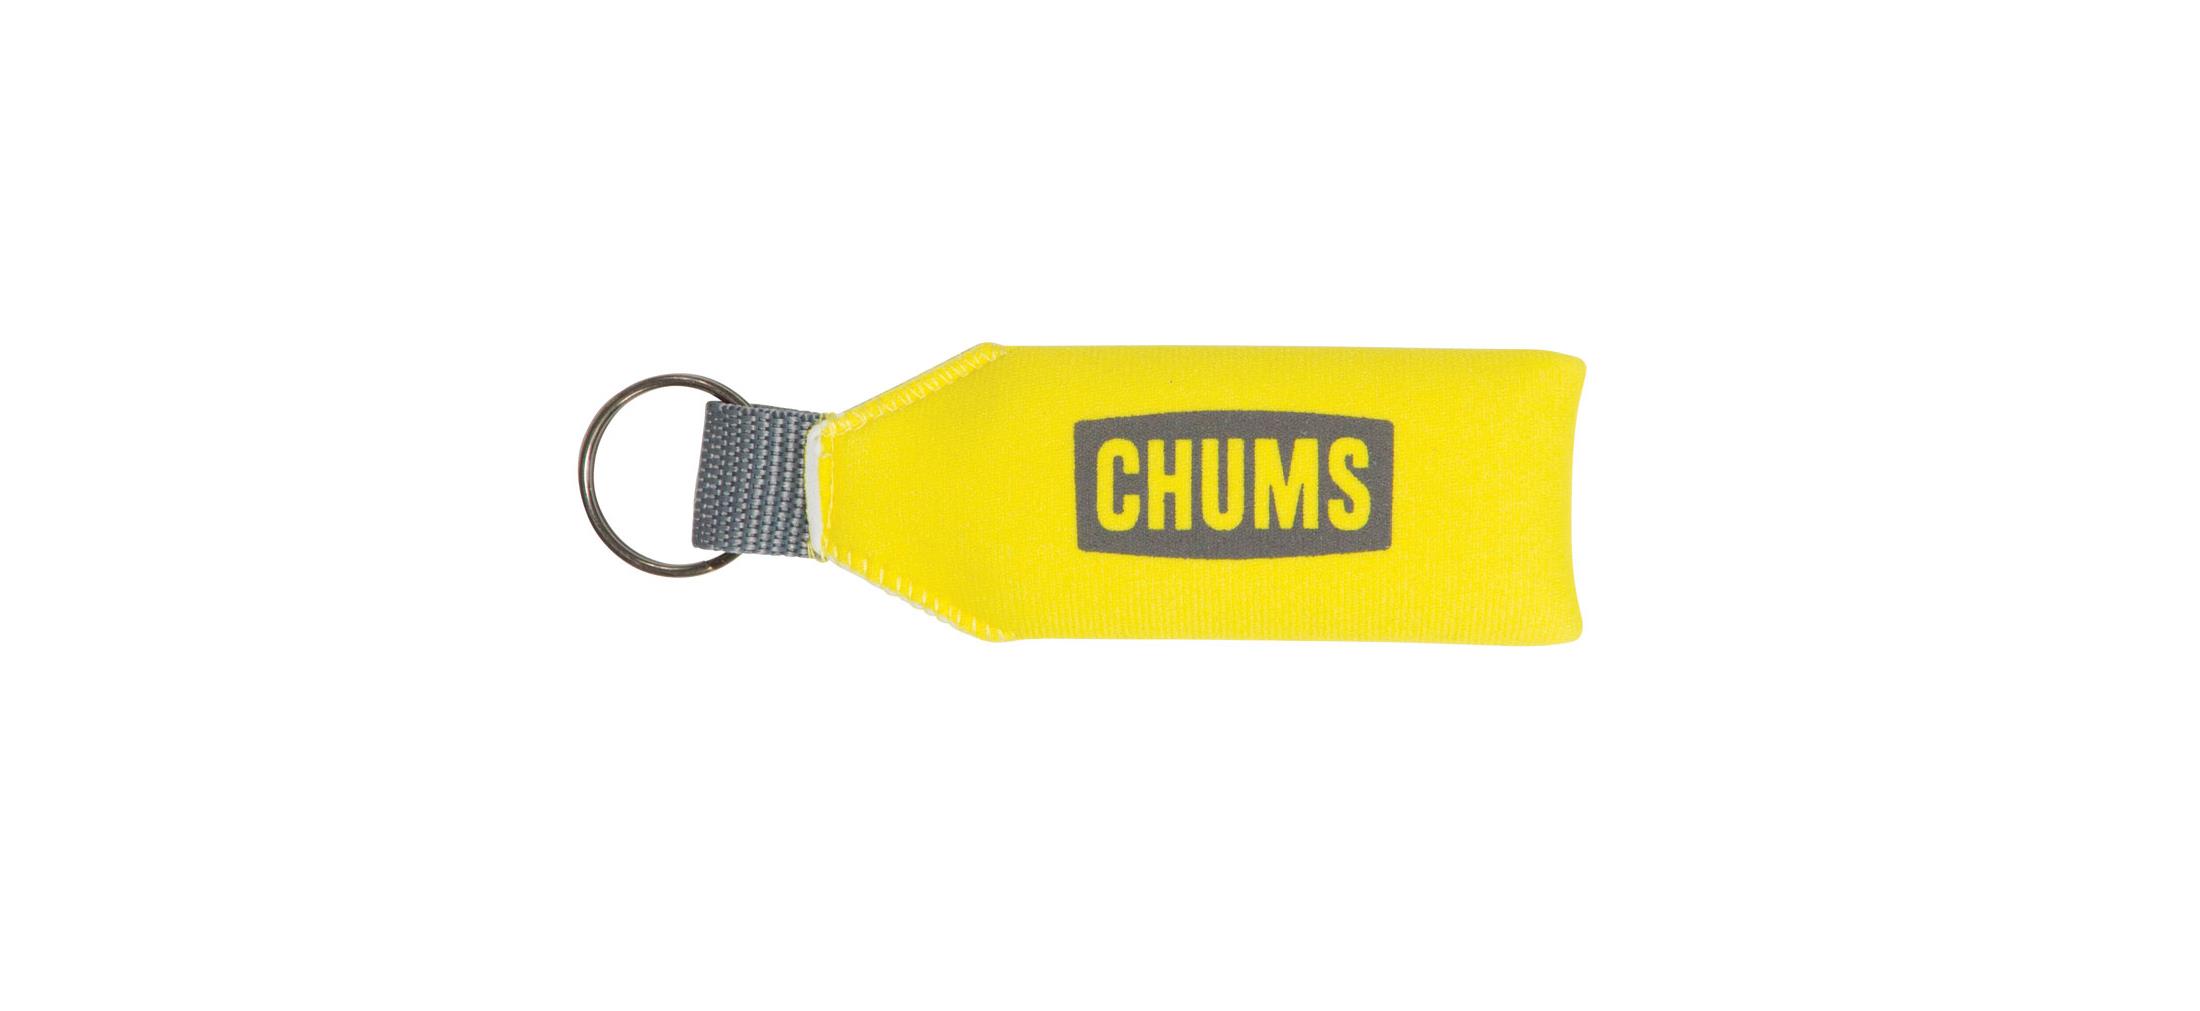 Chums Floating Neo Keychain OutdoorGB